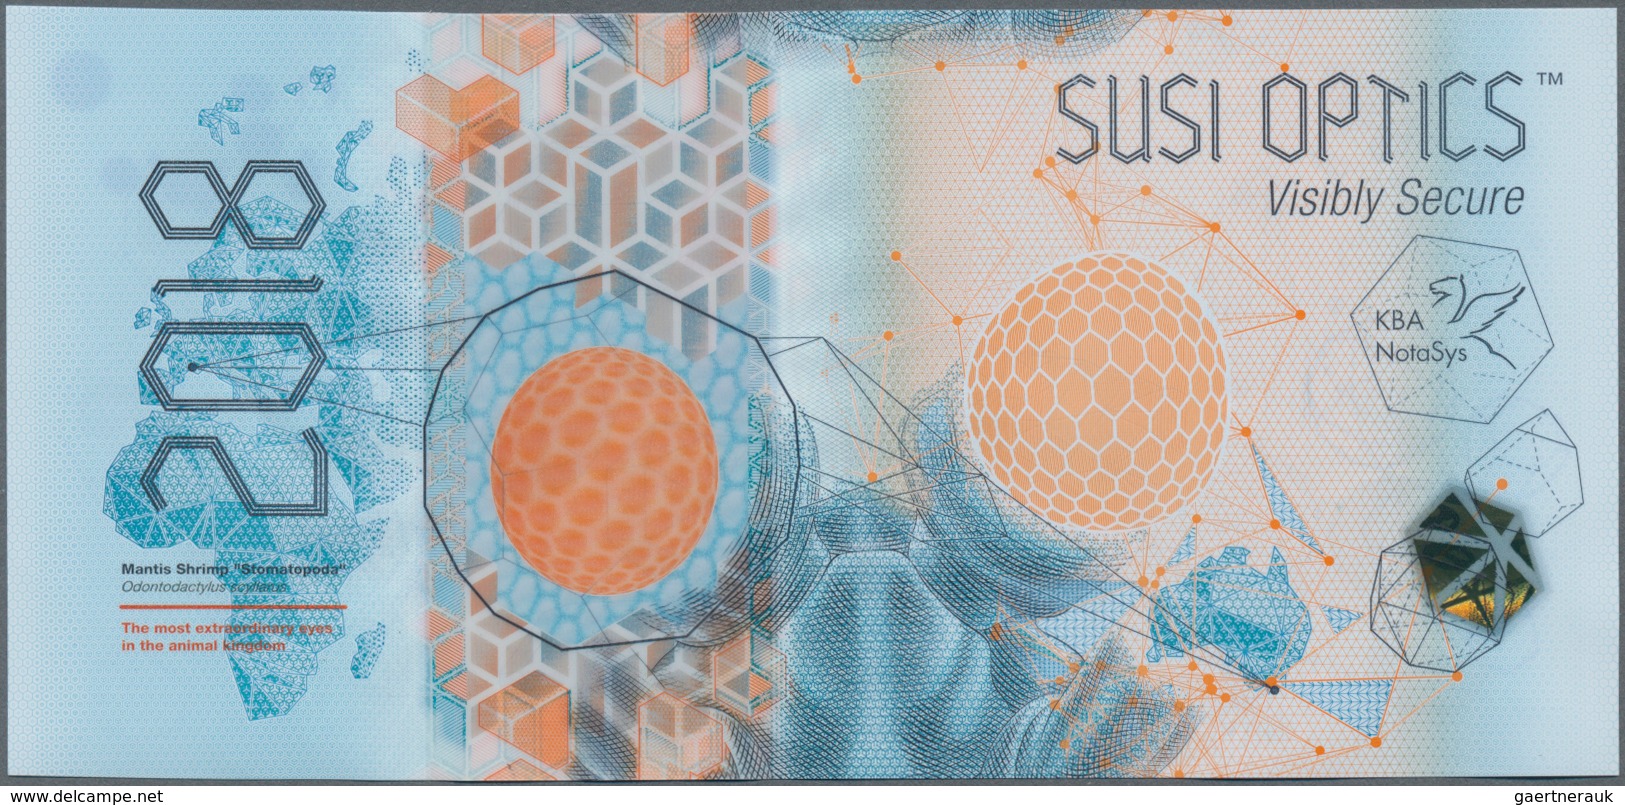 Testbanknoten: 2018 Polymer Test Note “Susi Optics 2018” By KBA-Notasys And Some Of The Industry's L - Specimen